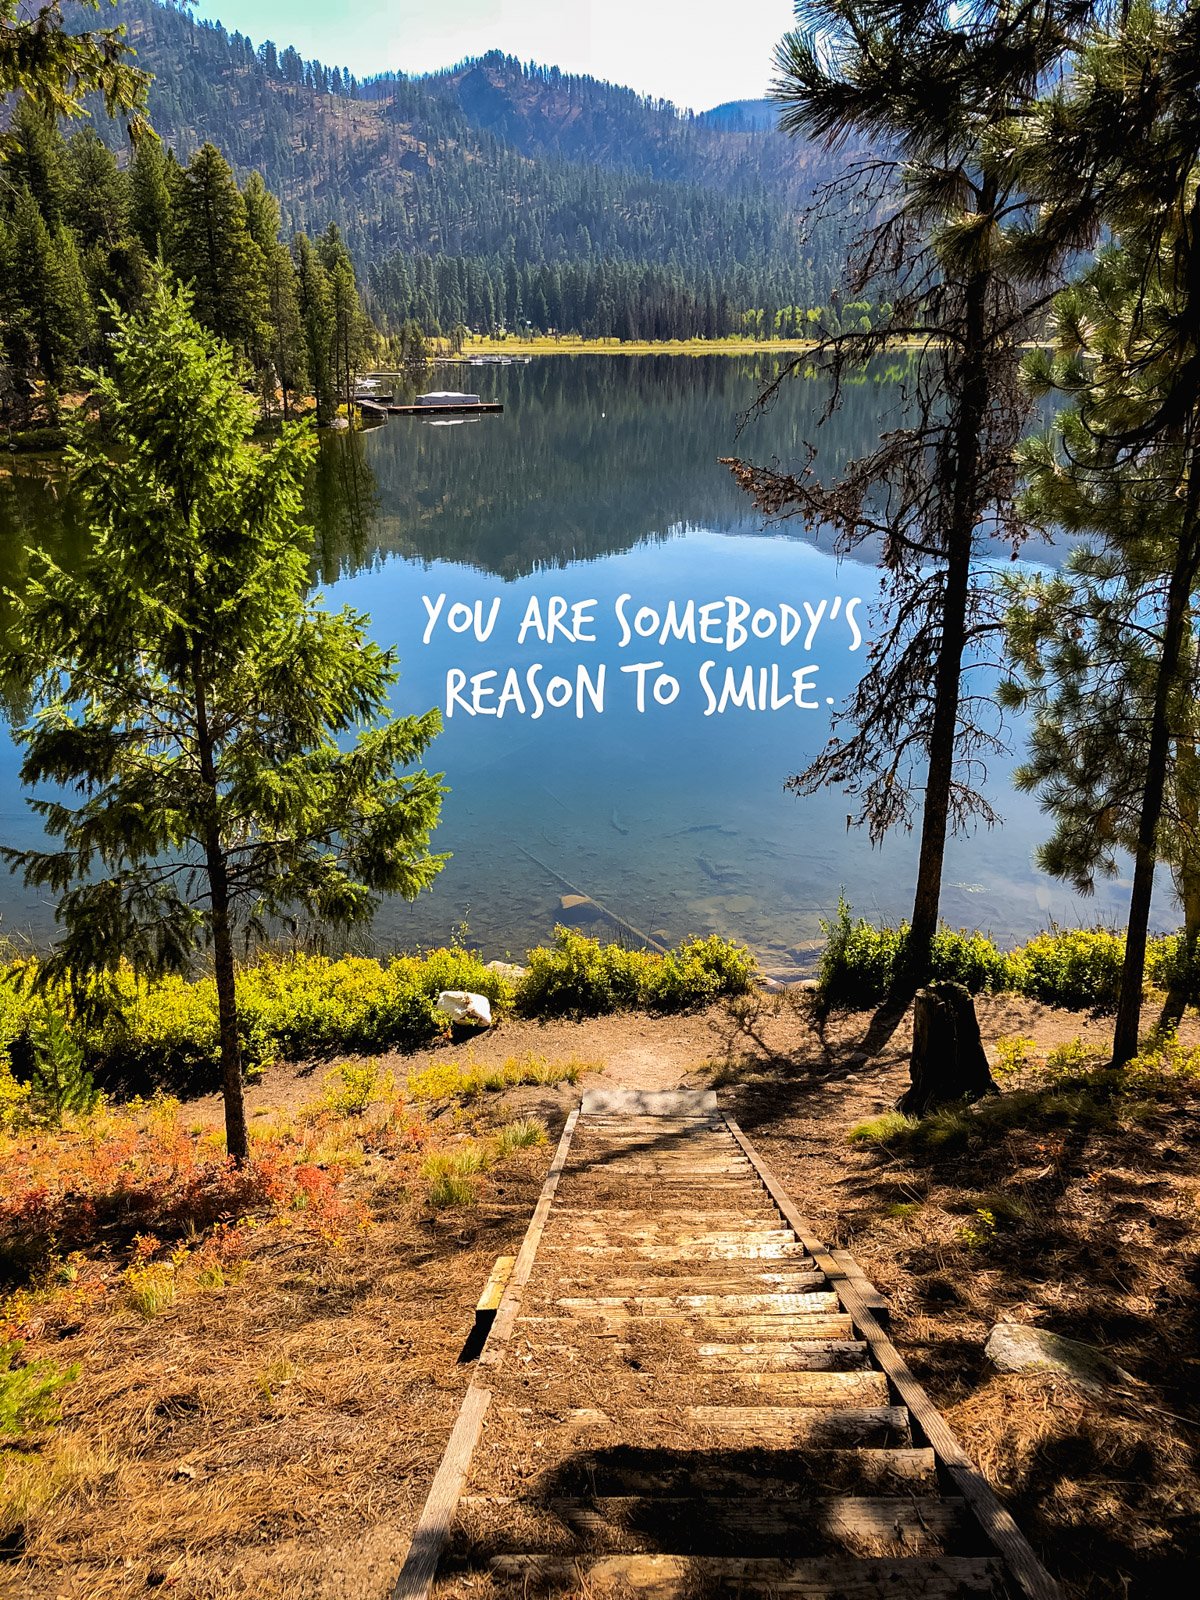 A picture of a lake and forest with a quote "You are somebody's reason to smile."